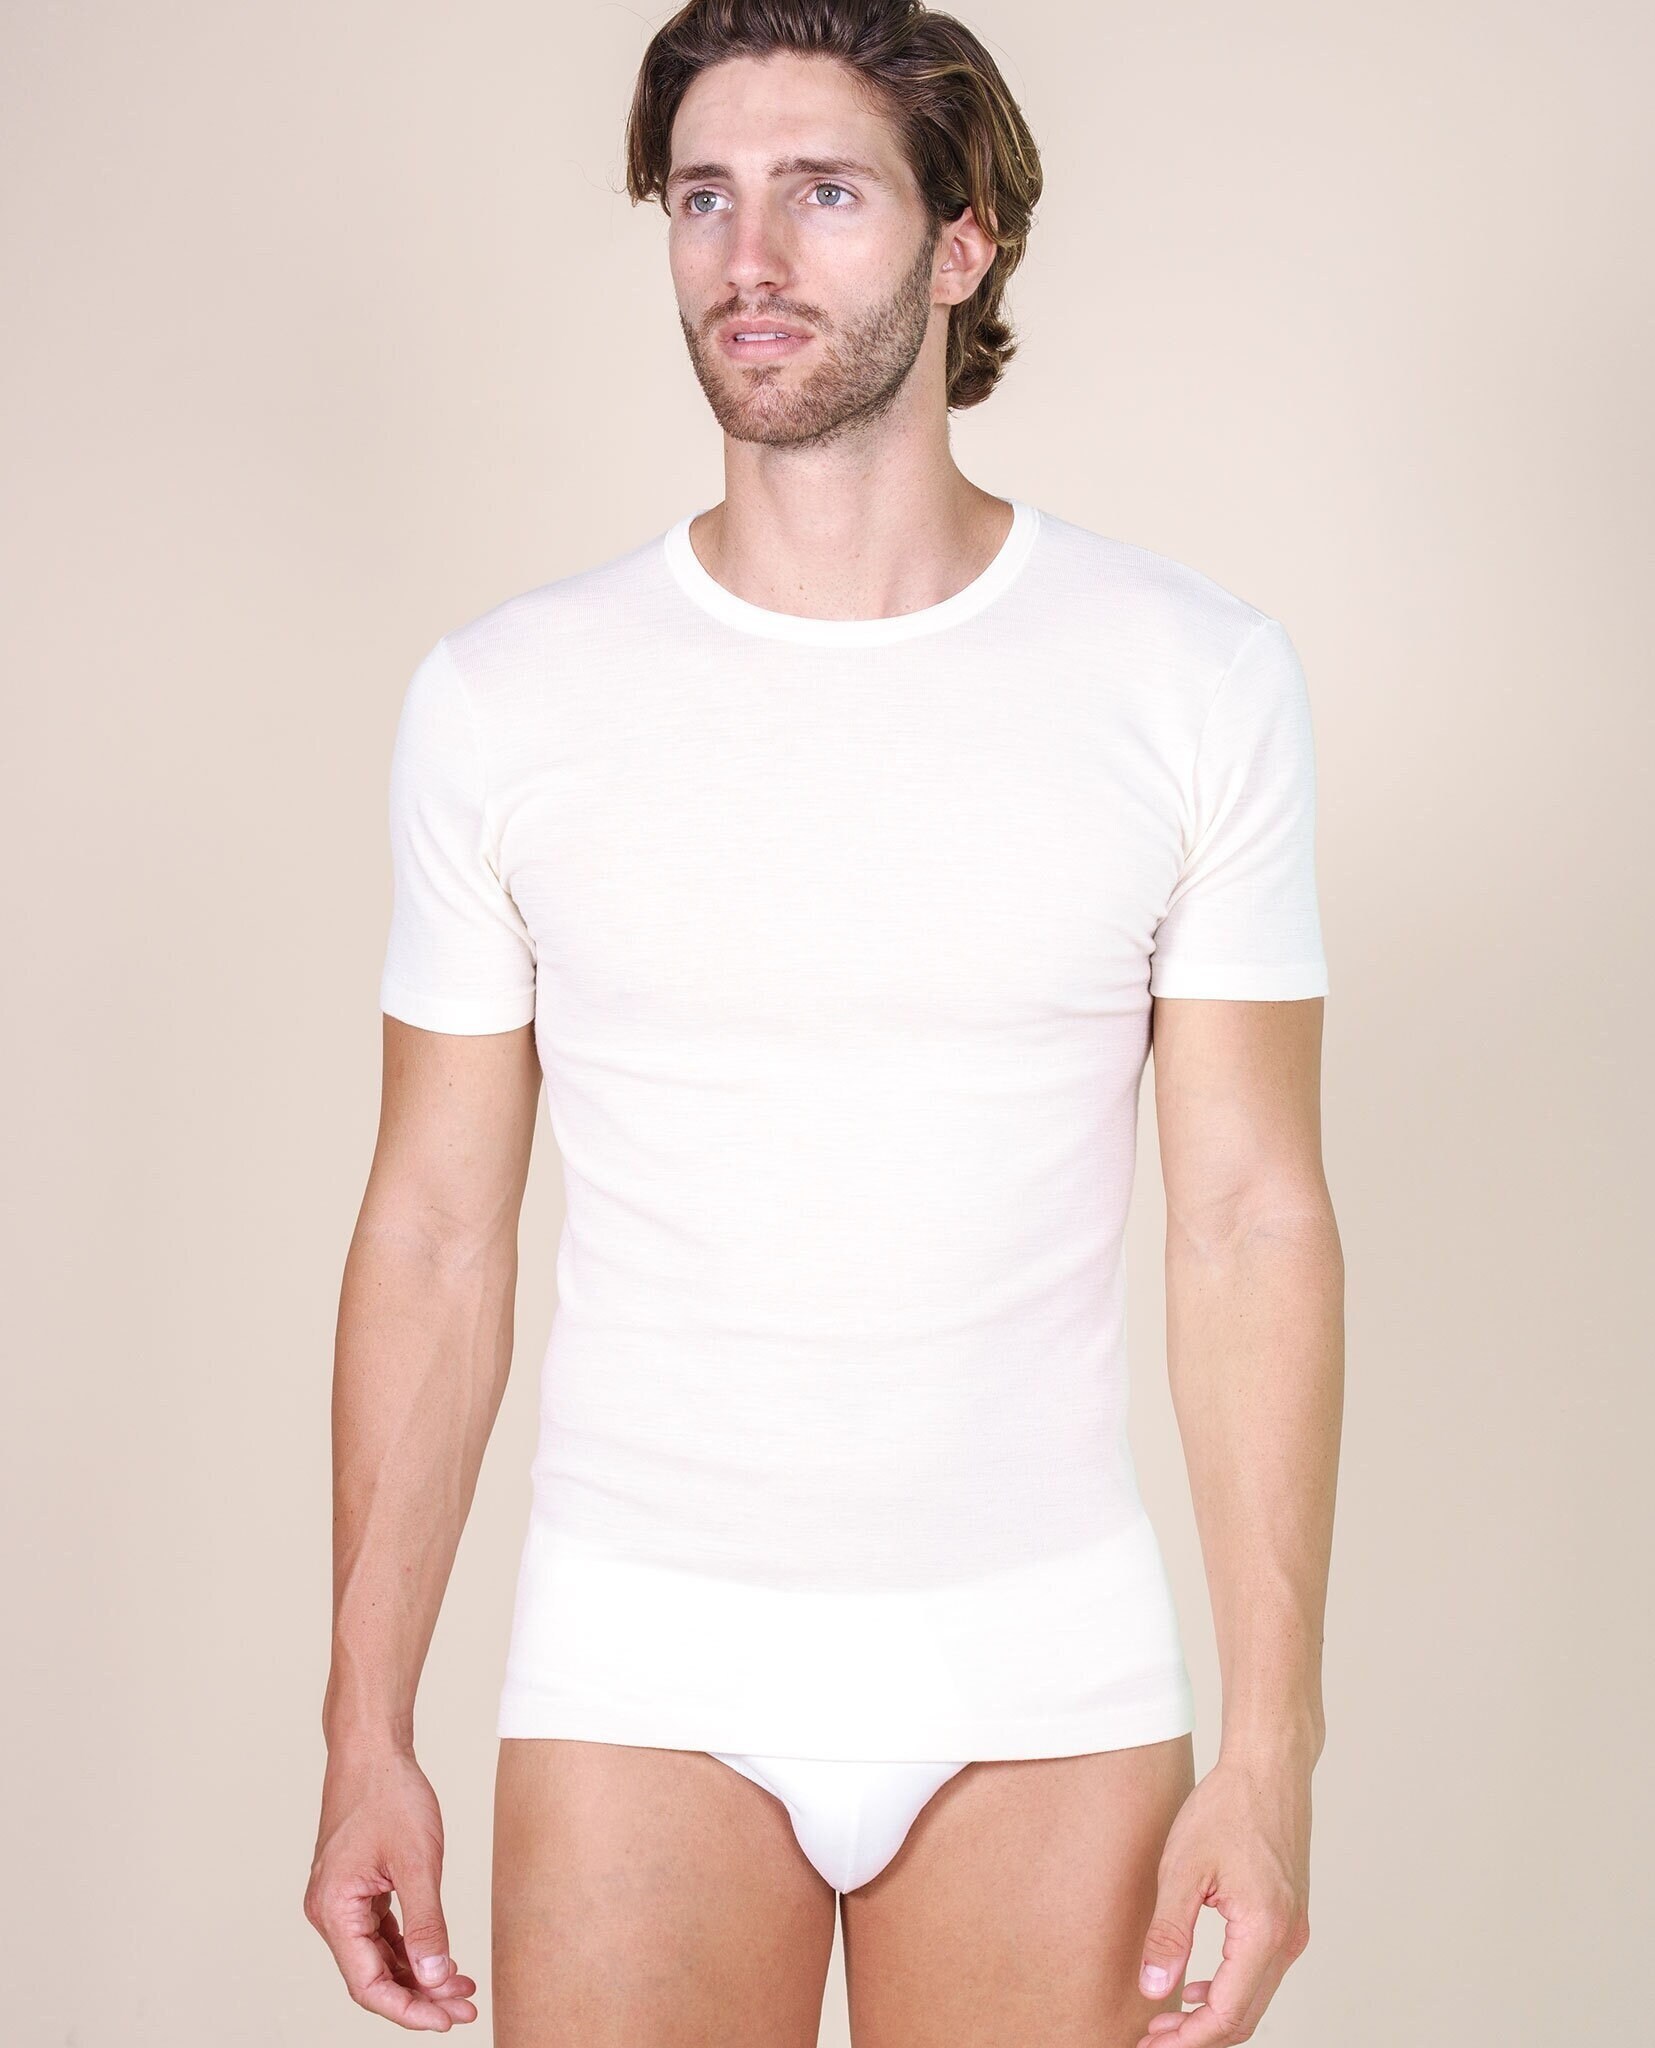 100% WOOL Short-sleeve Off-white Men's Shirt. Made in ITALY. Perfect for  Layering. -  Canada